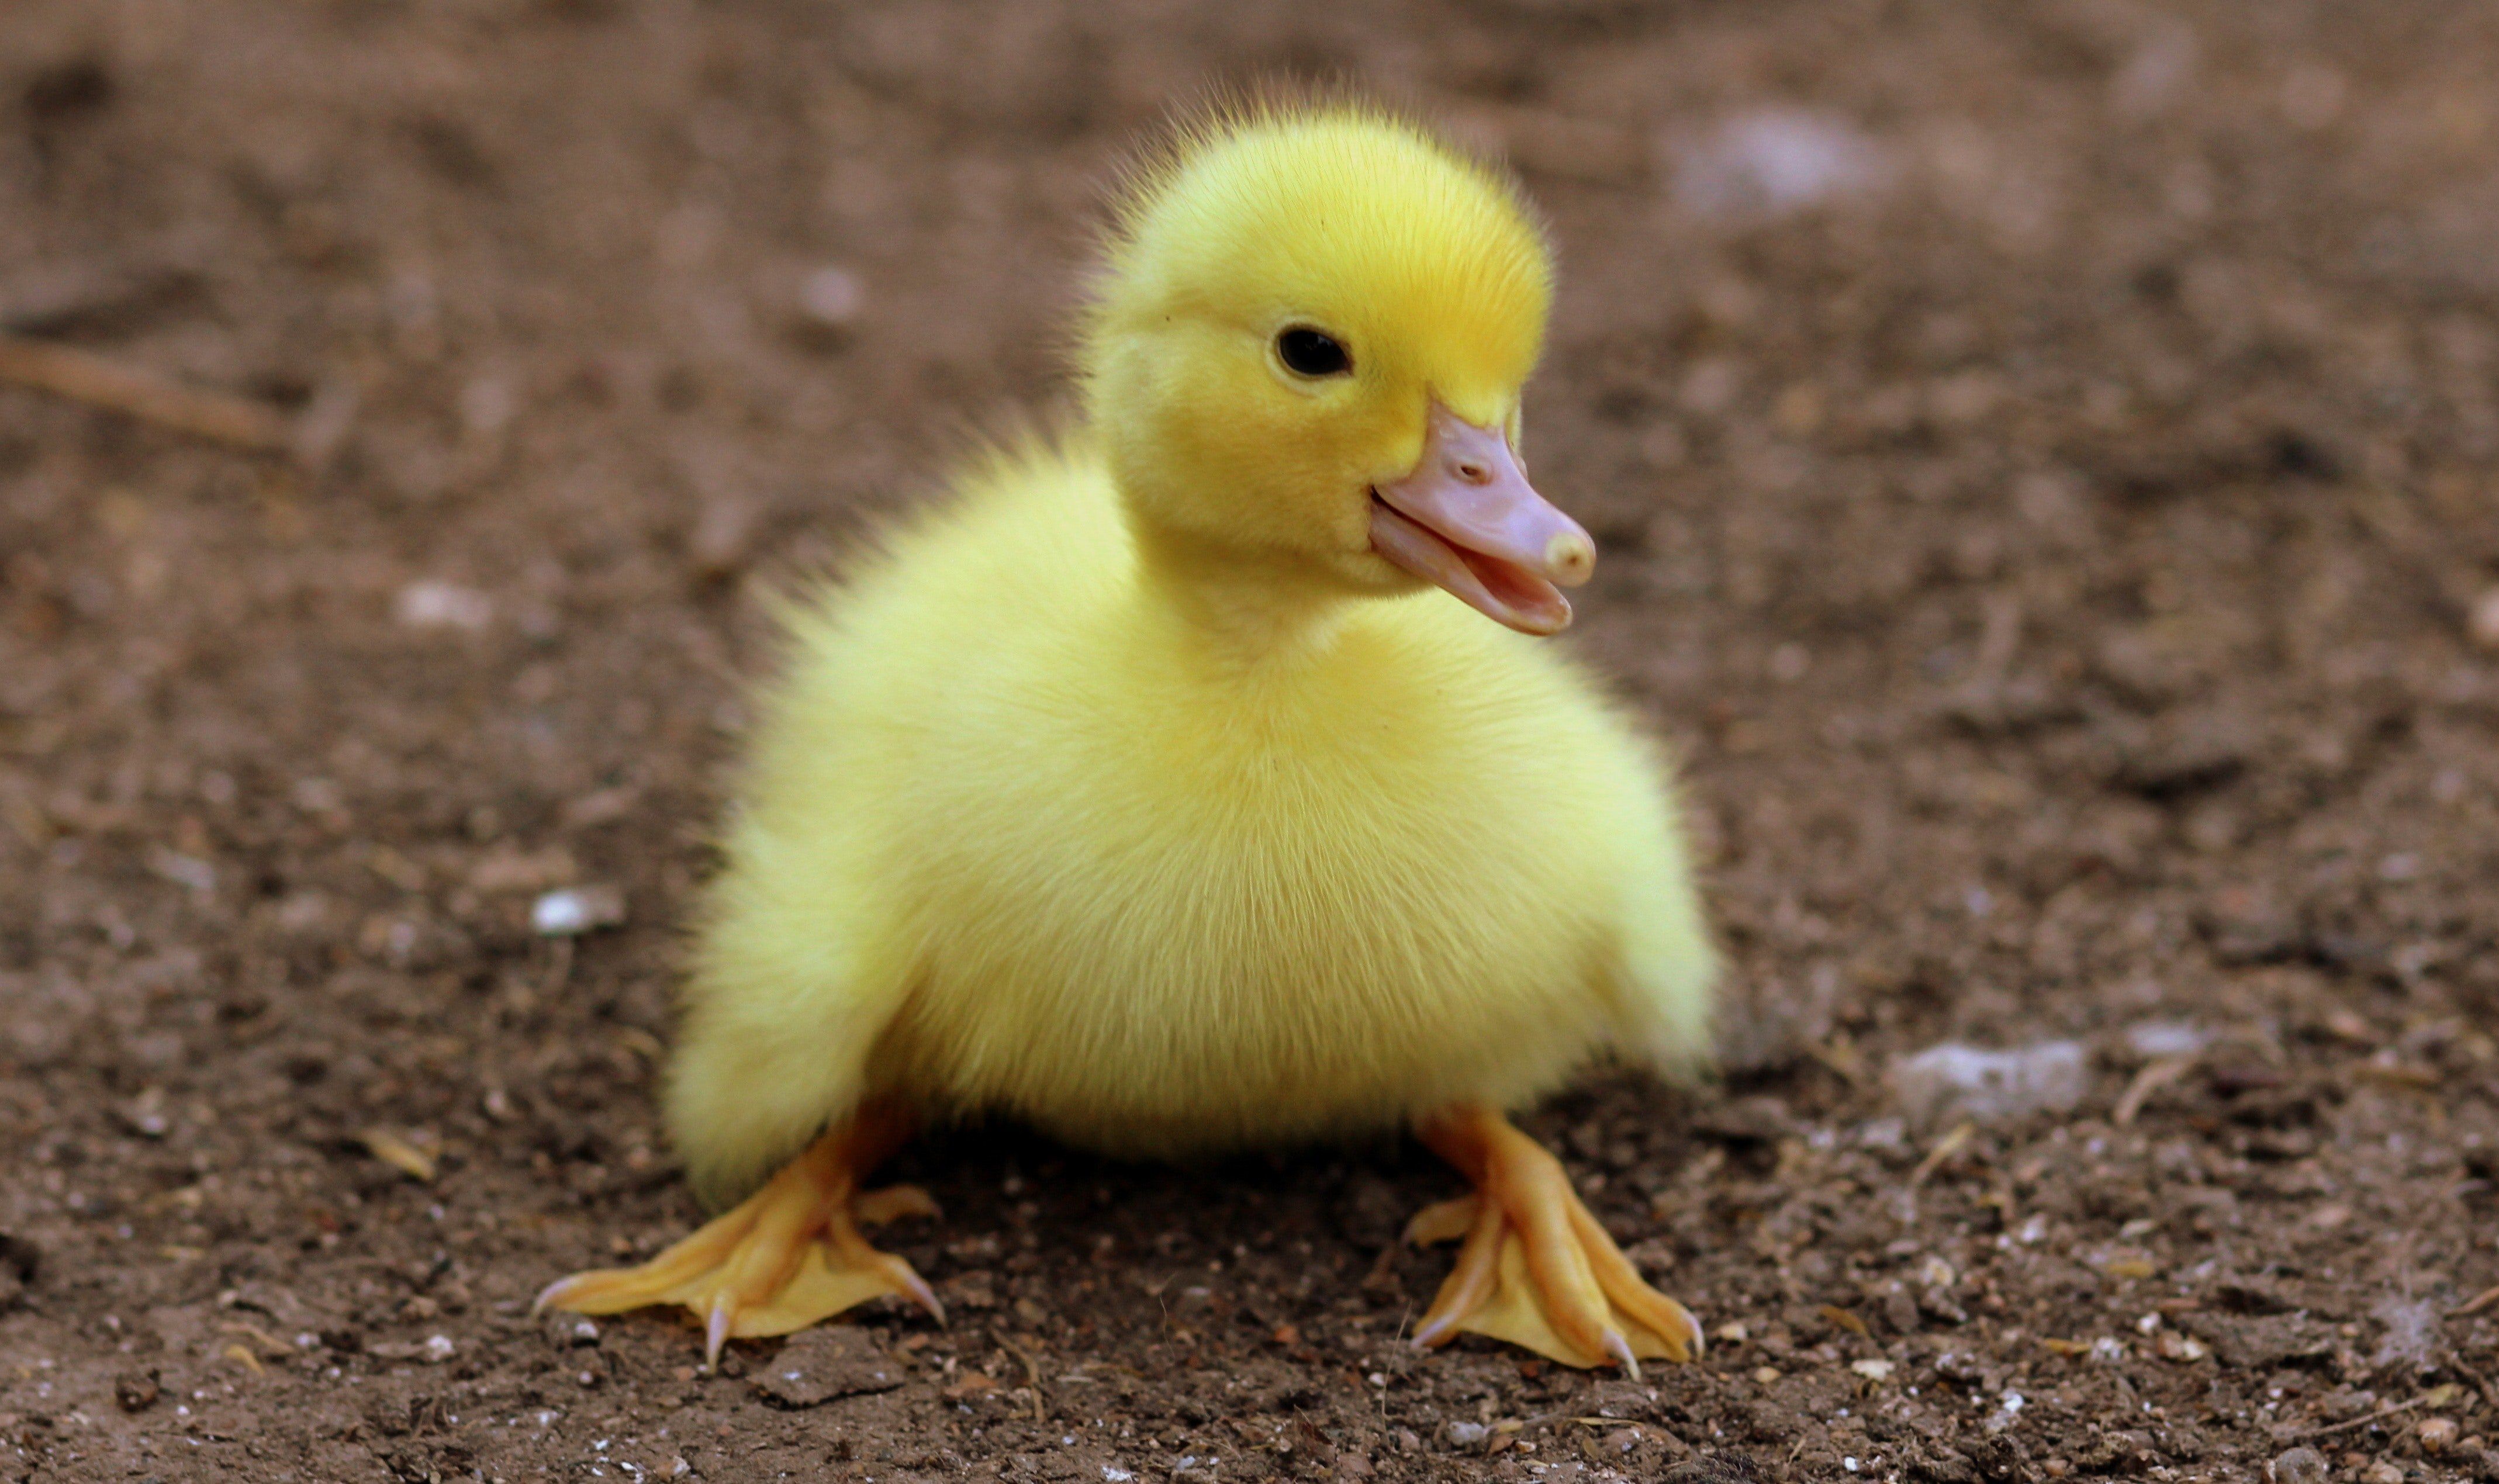 Duck 4K wallpaper for your desktop or mobile screen free and easy to download